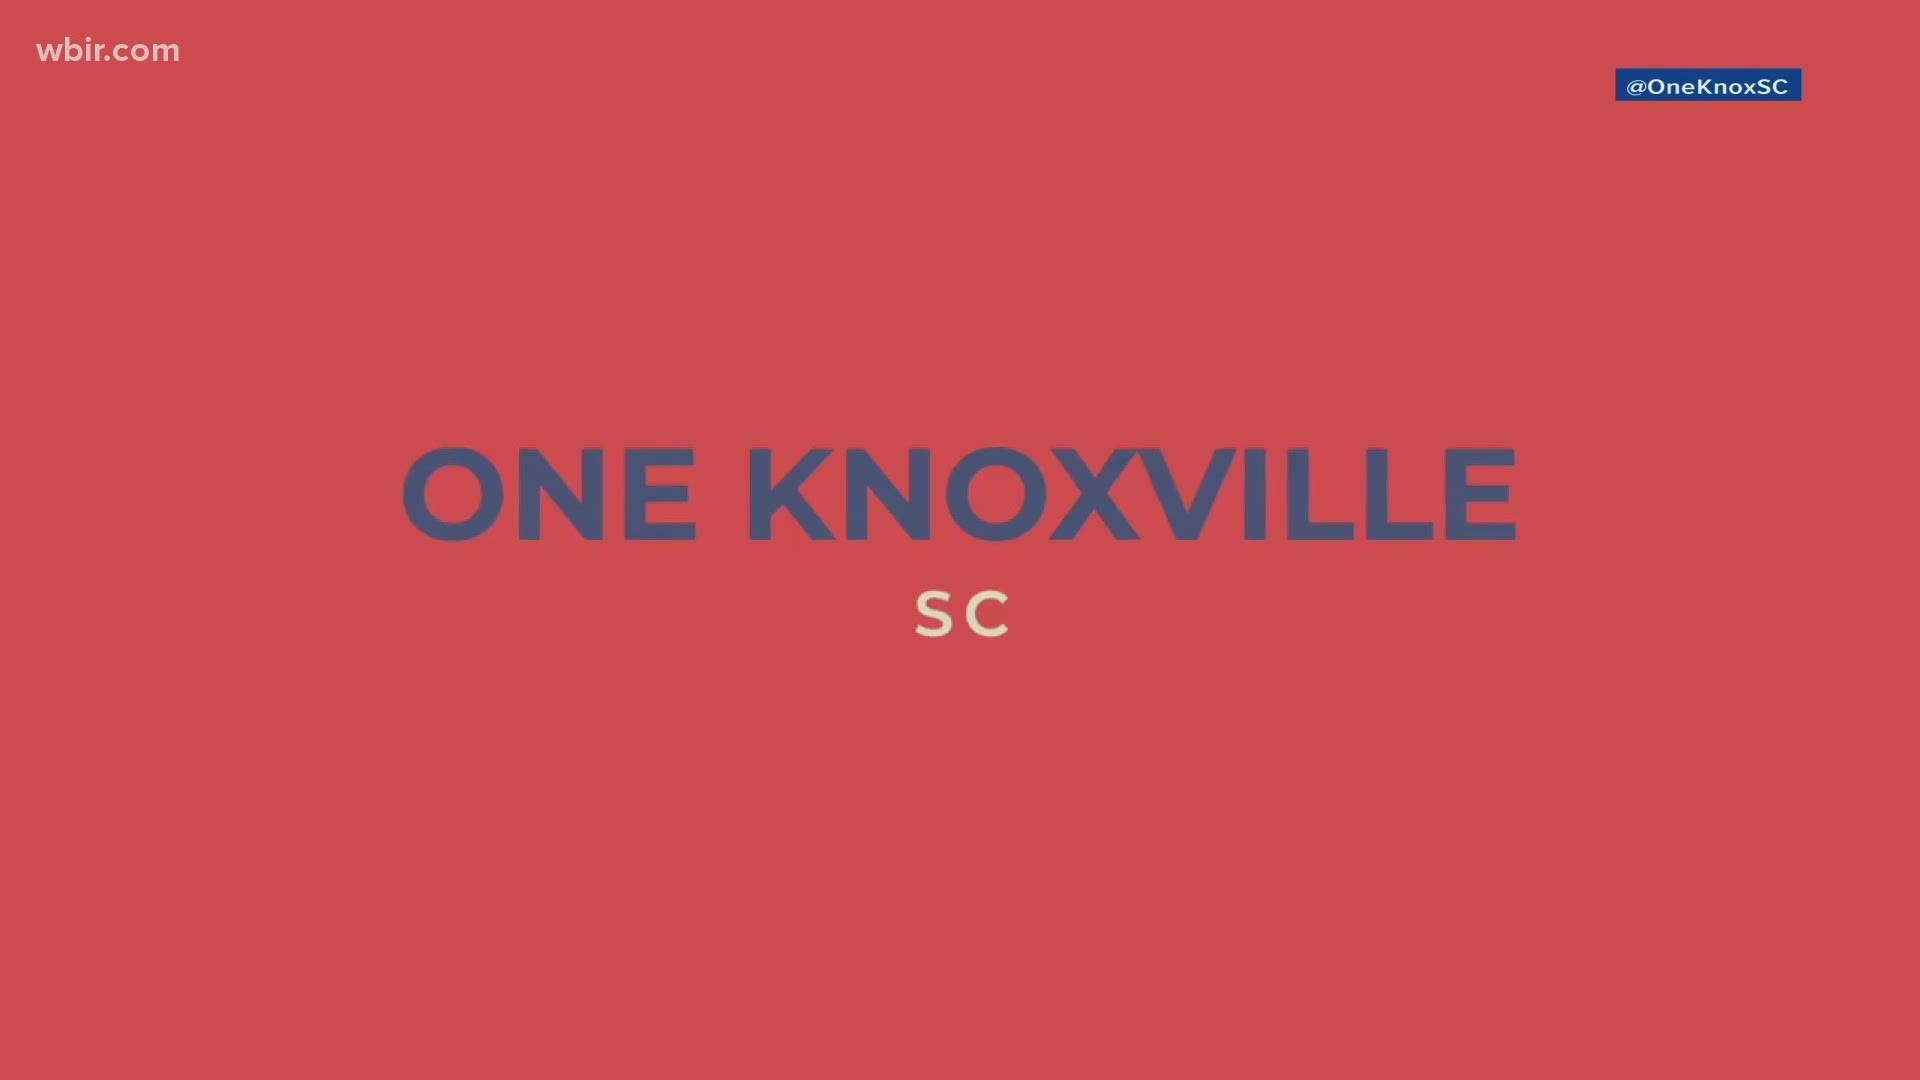 Knoxville's new professional soccer club has announced its name.